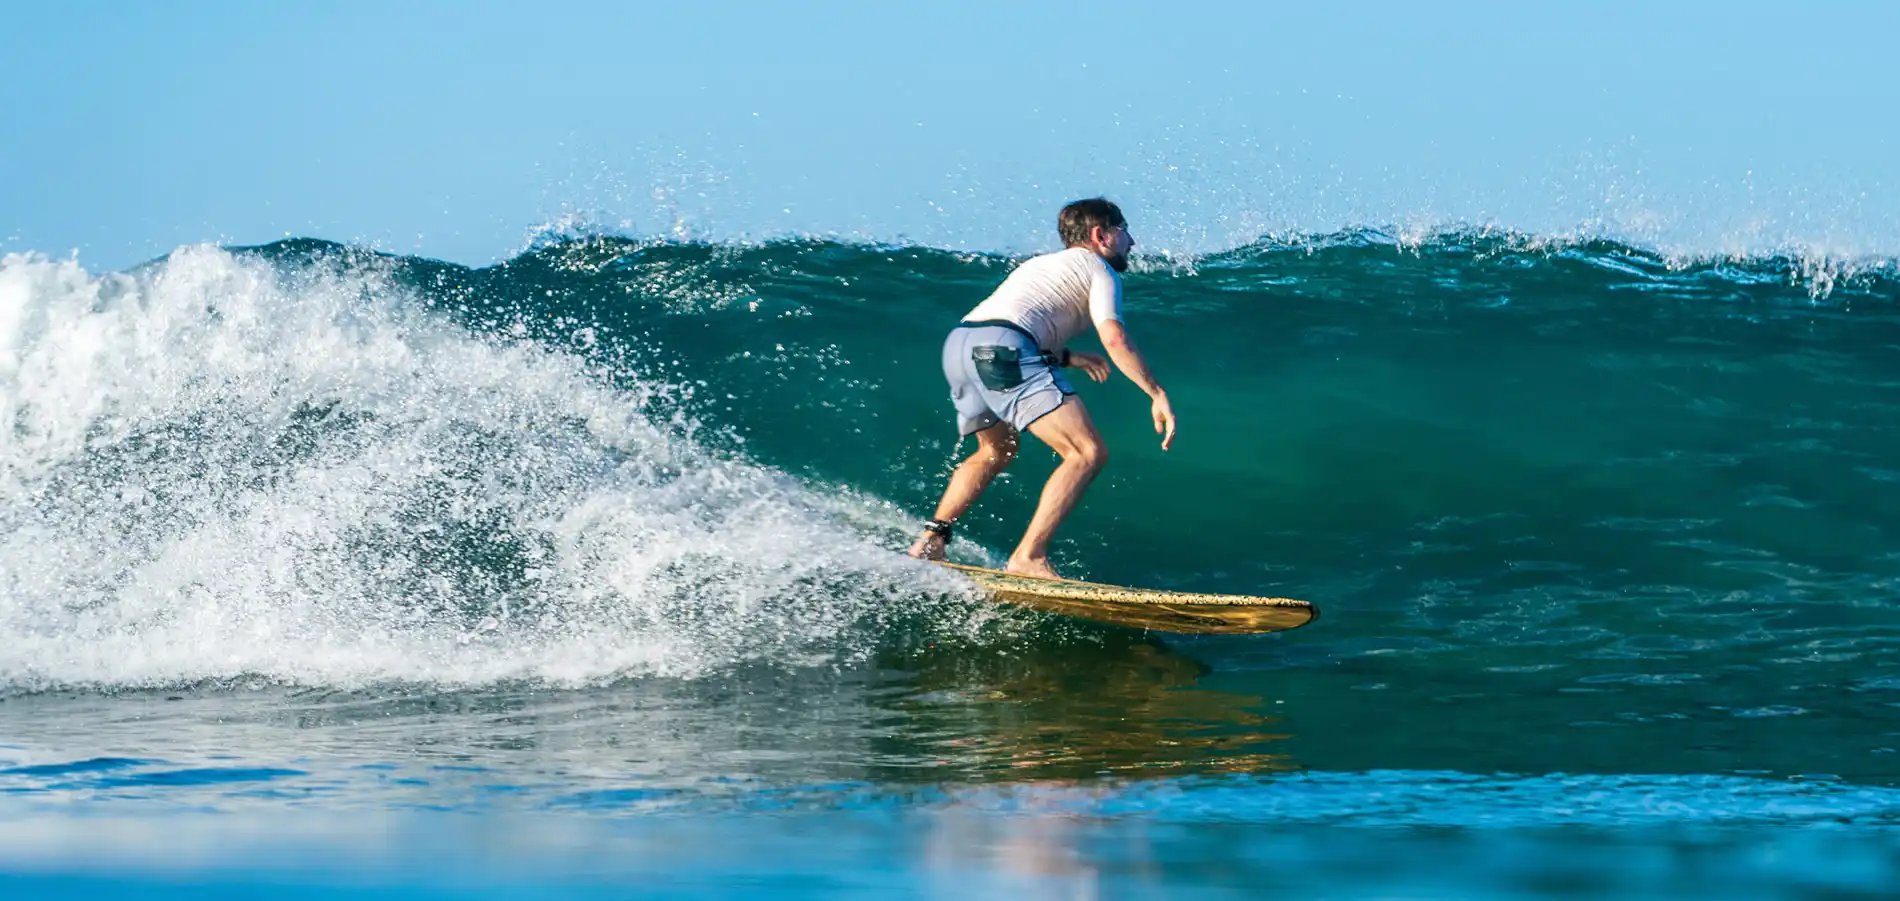 Costa Rica Surf Camp Vacations. Surfing down the line at the Tamarindo beach break, Costa Rica